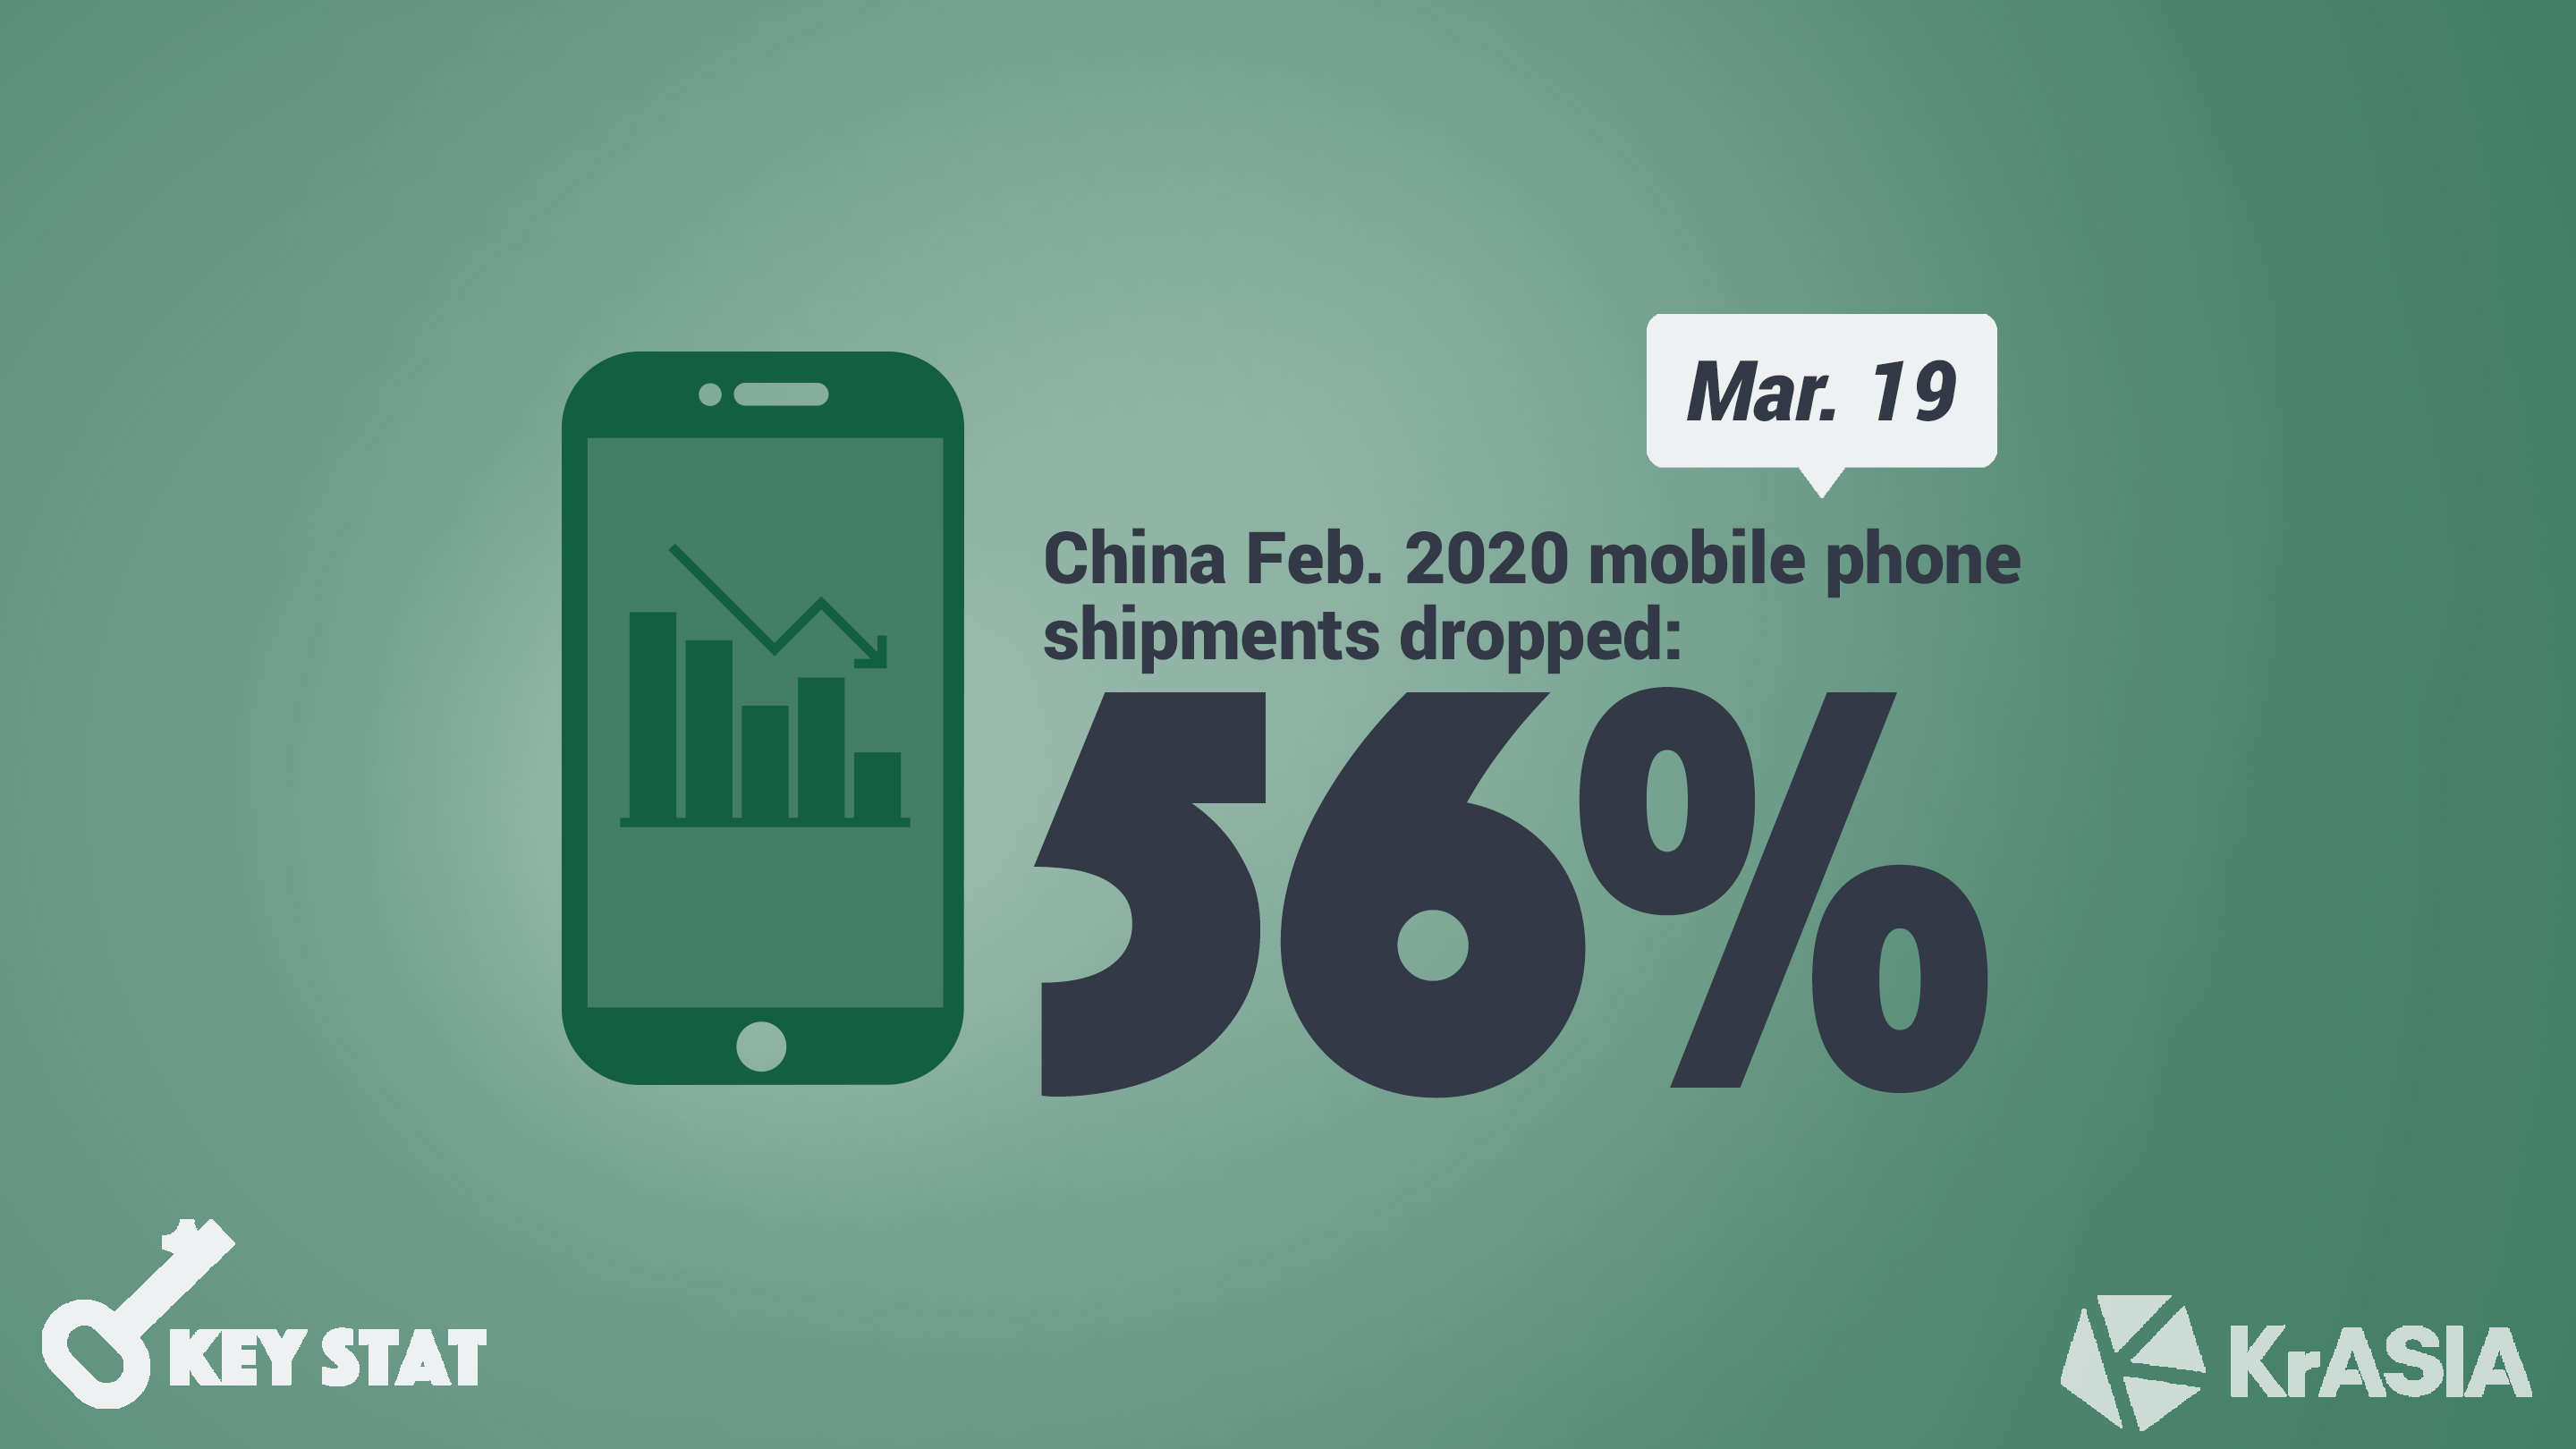 KEY STAT | China’s mobile phone shipments drop 56% in February